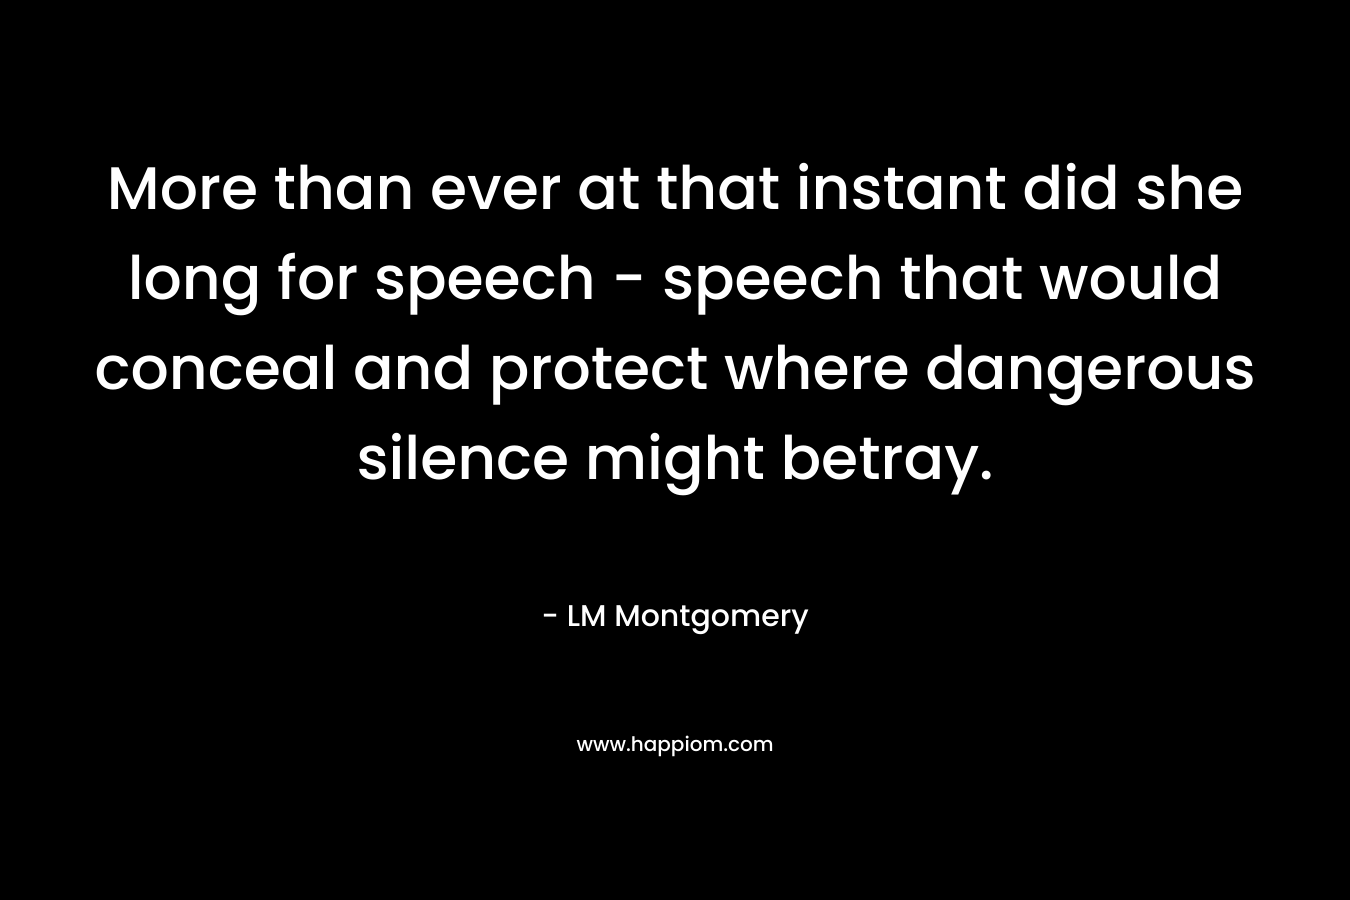 More than ever at that instant did she long for speech - speech that would conceal and protect where dangerous silence might betray.